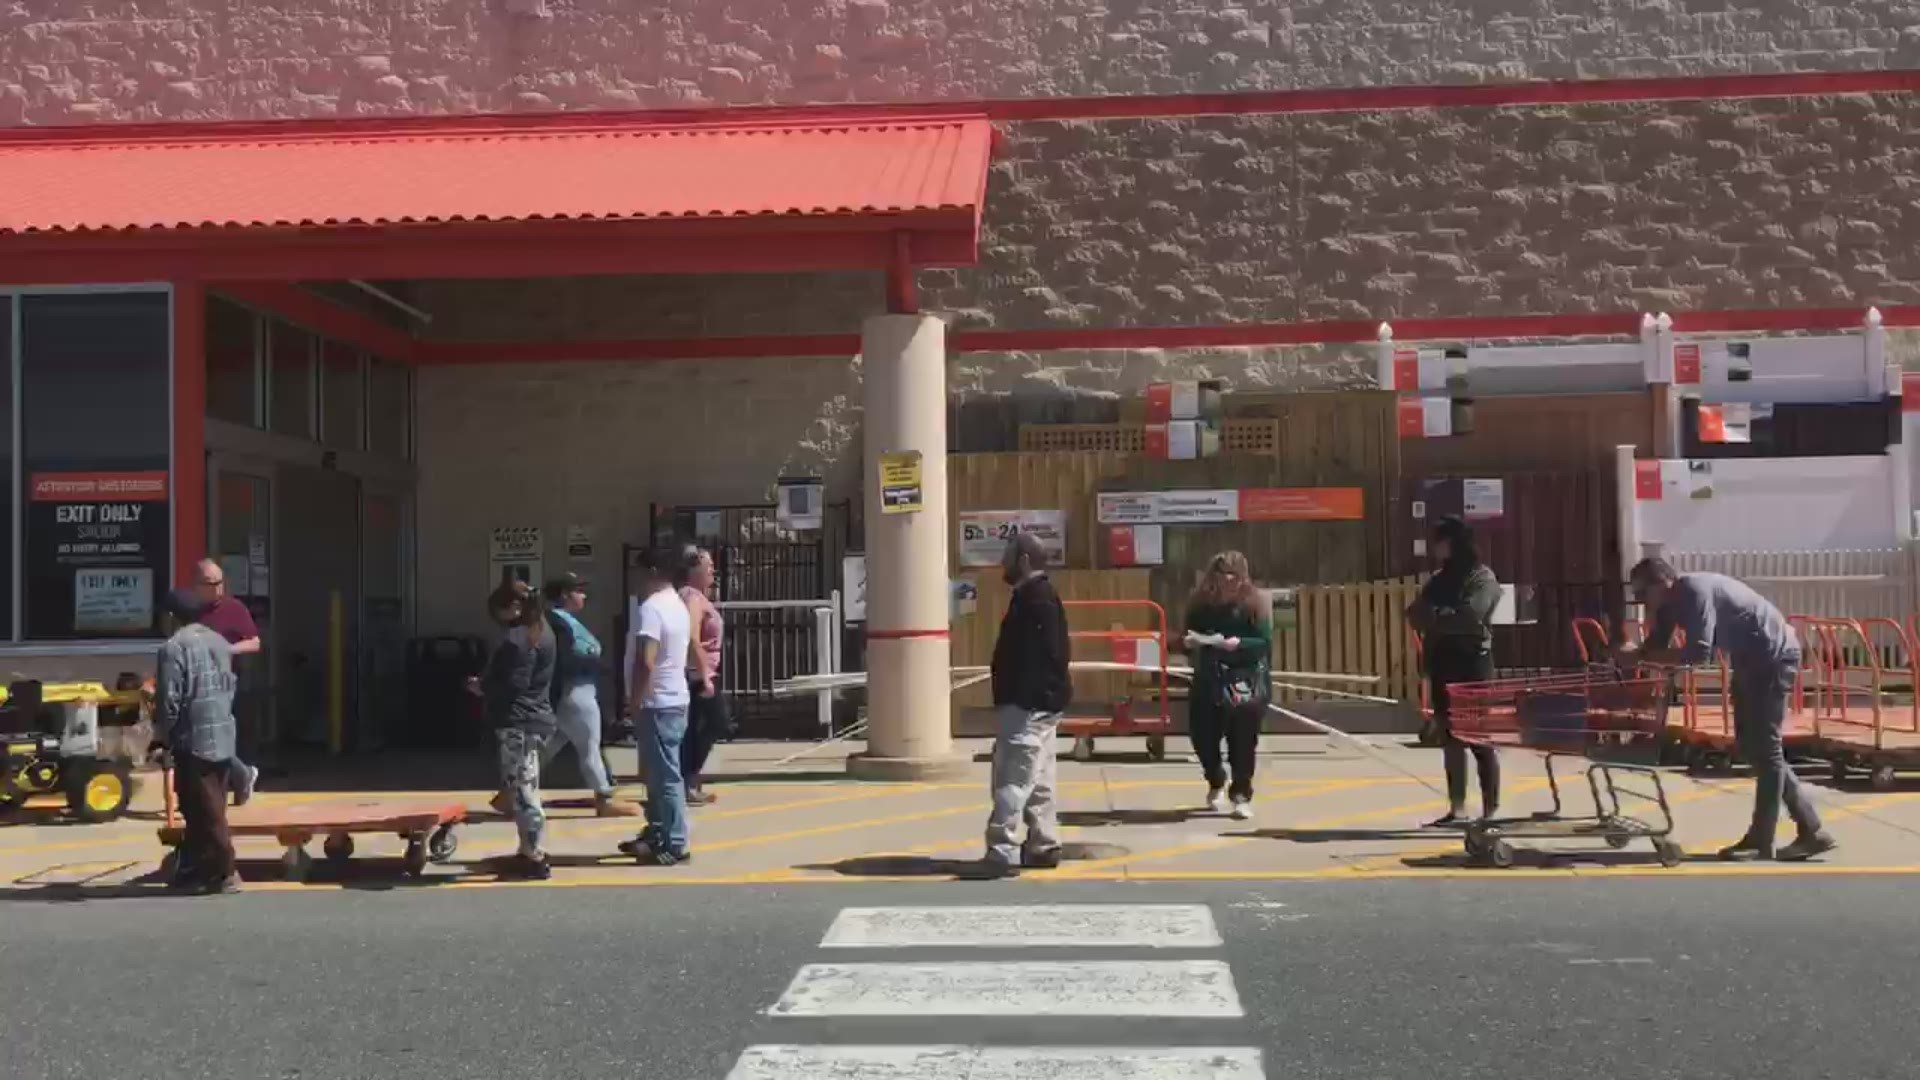 Long lines at Home Depot, captured by Tim Doane.